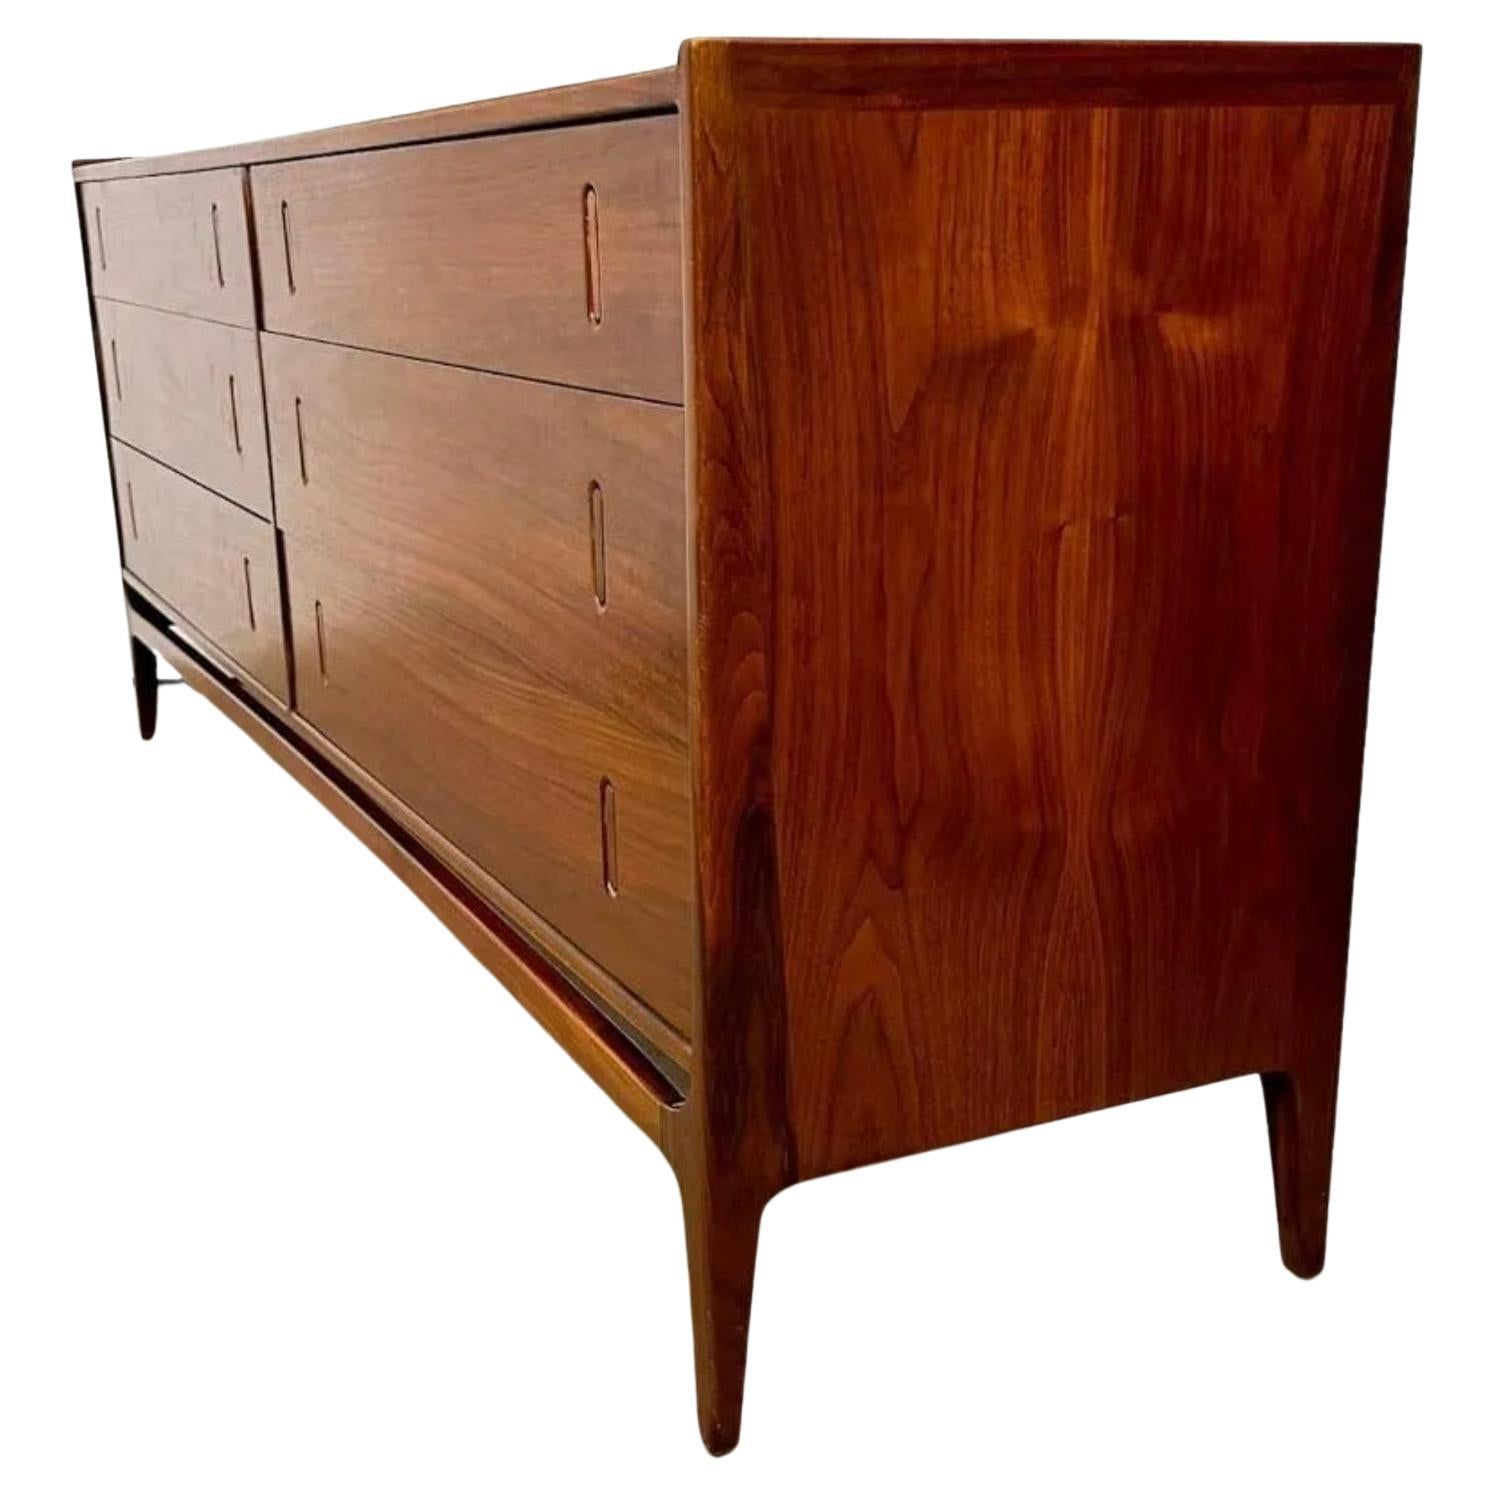 Mid Century Modern long low Walnut 6 Drawer Dresser designed by Richard Thompson for Glenn of California. Walnut case with flush pop out rosewood pulls. Drawers slide smoothly. Structurally solid. Good vintage condition. Made in USA Circa 1960.